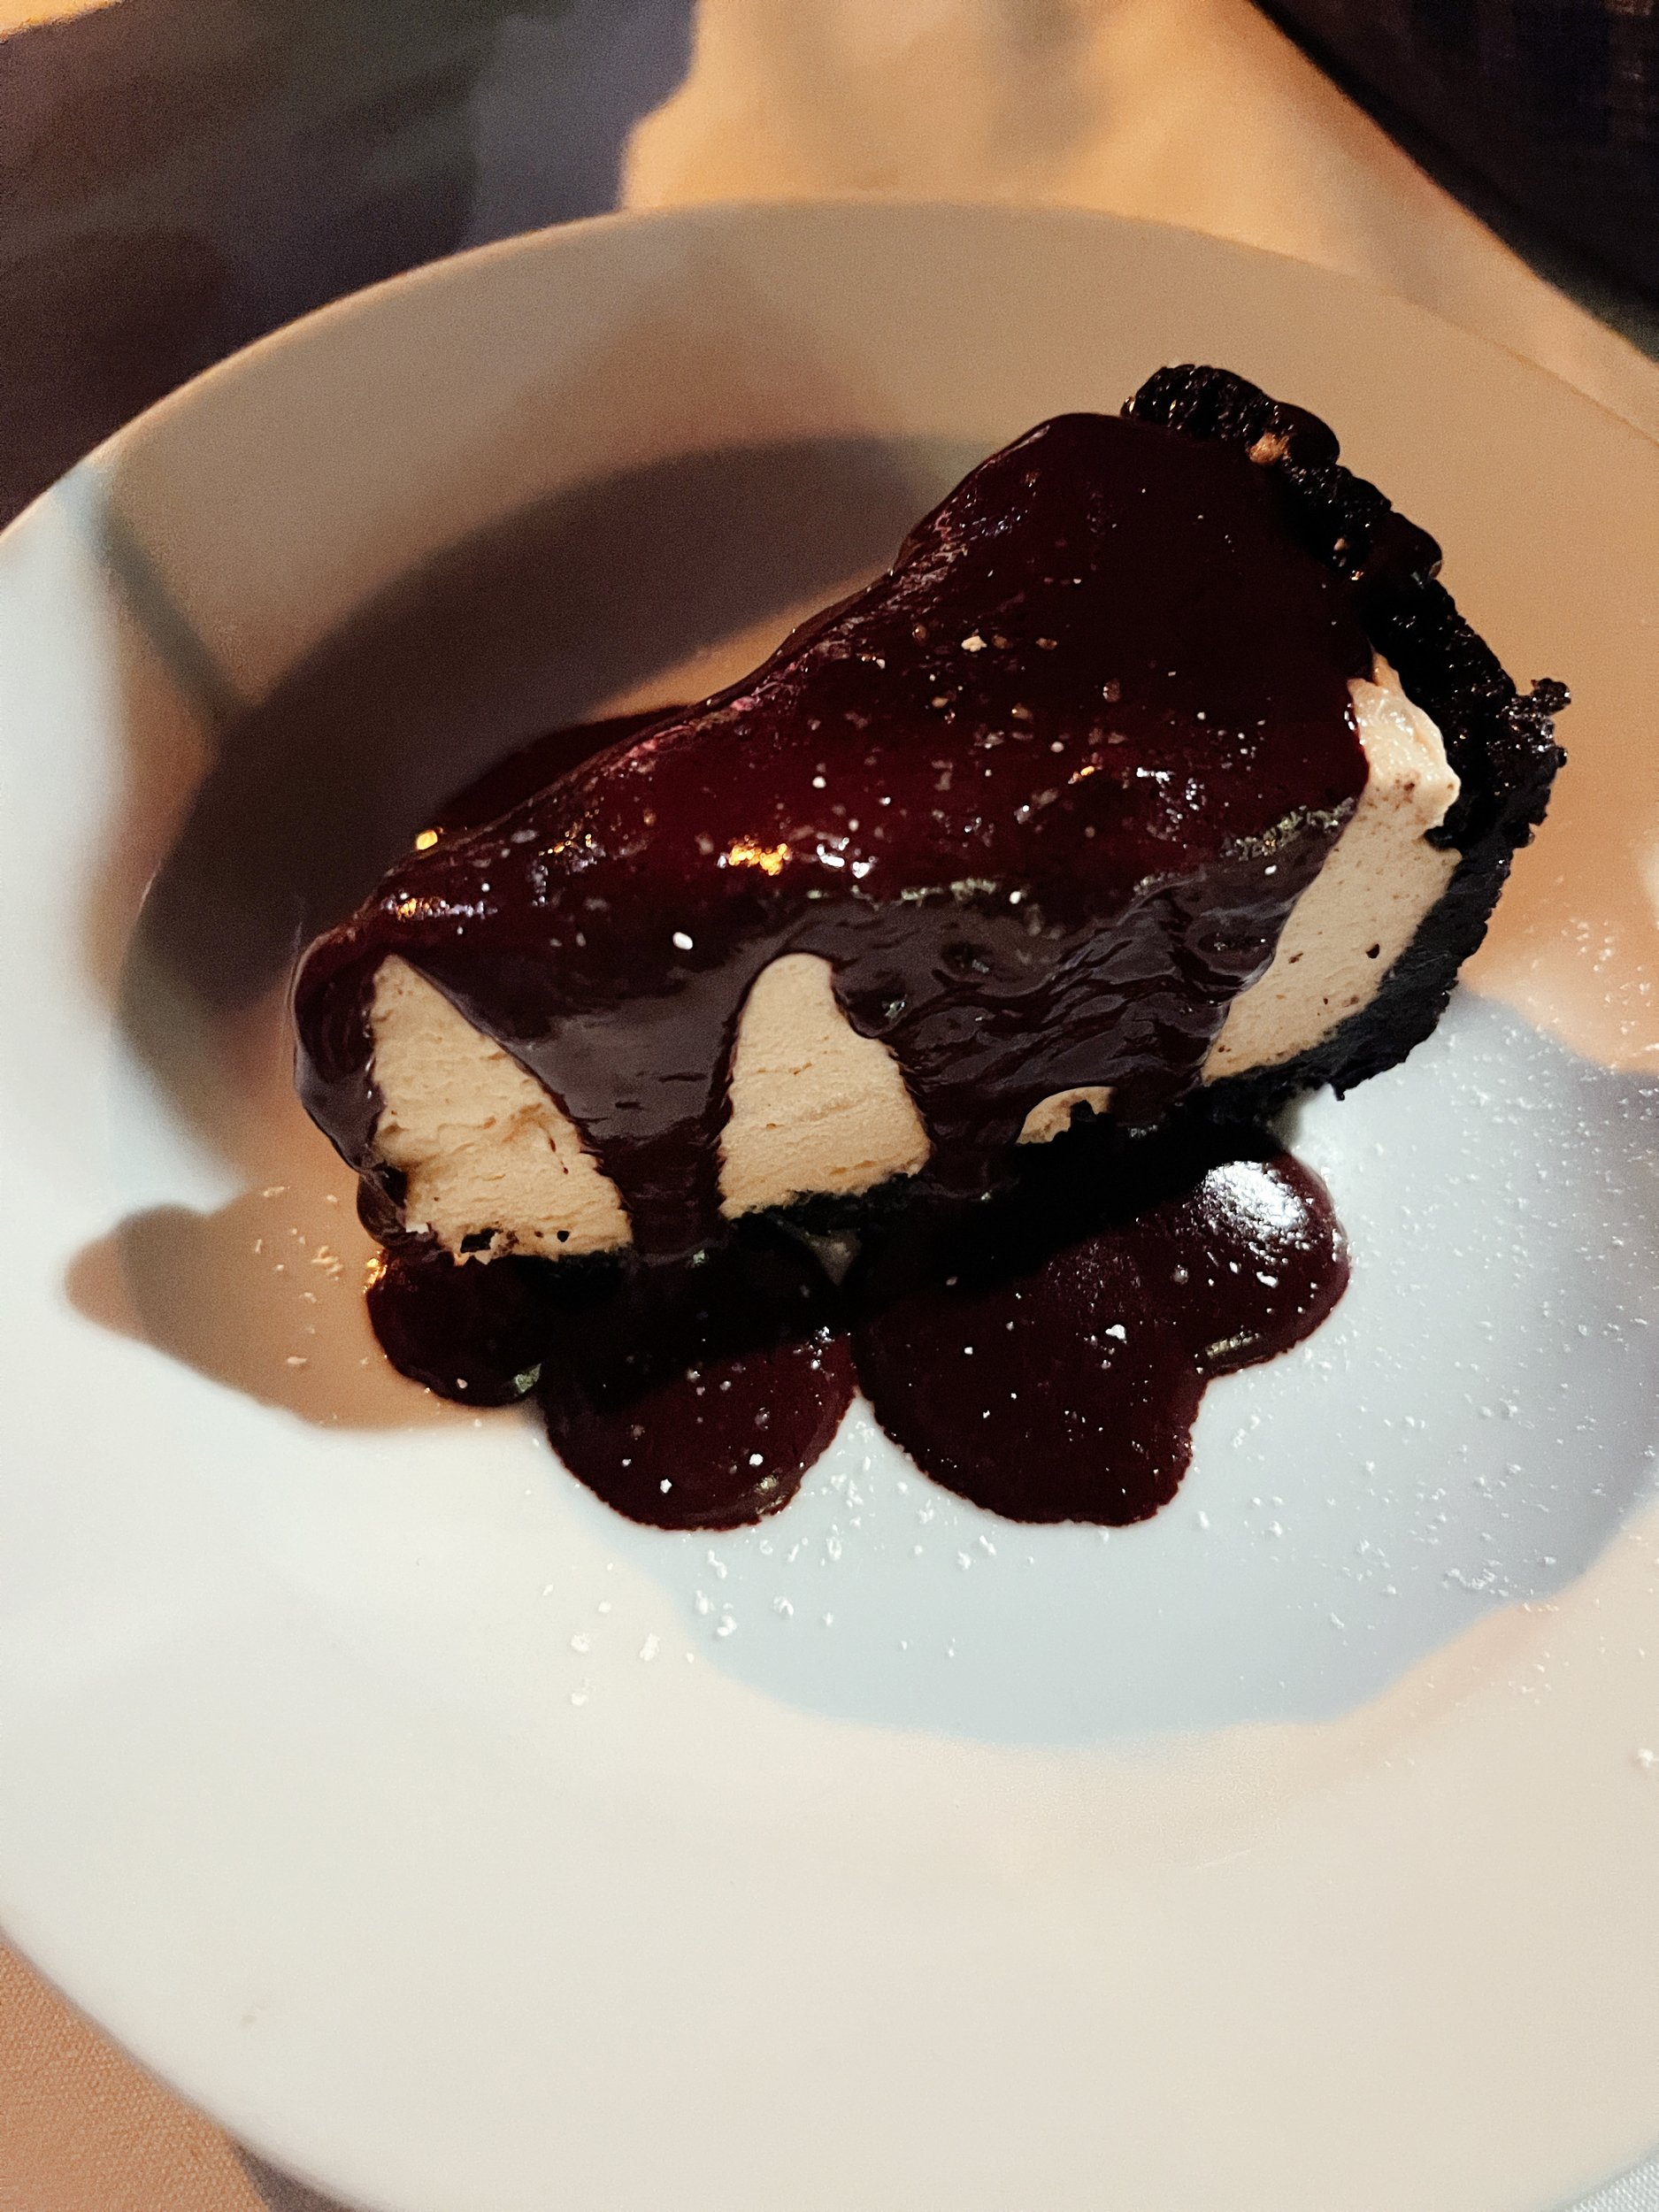 Hege's peanut butter cheesecake covered in chocolate